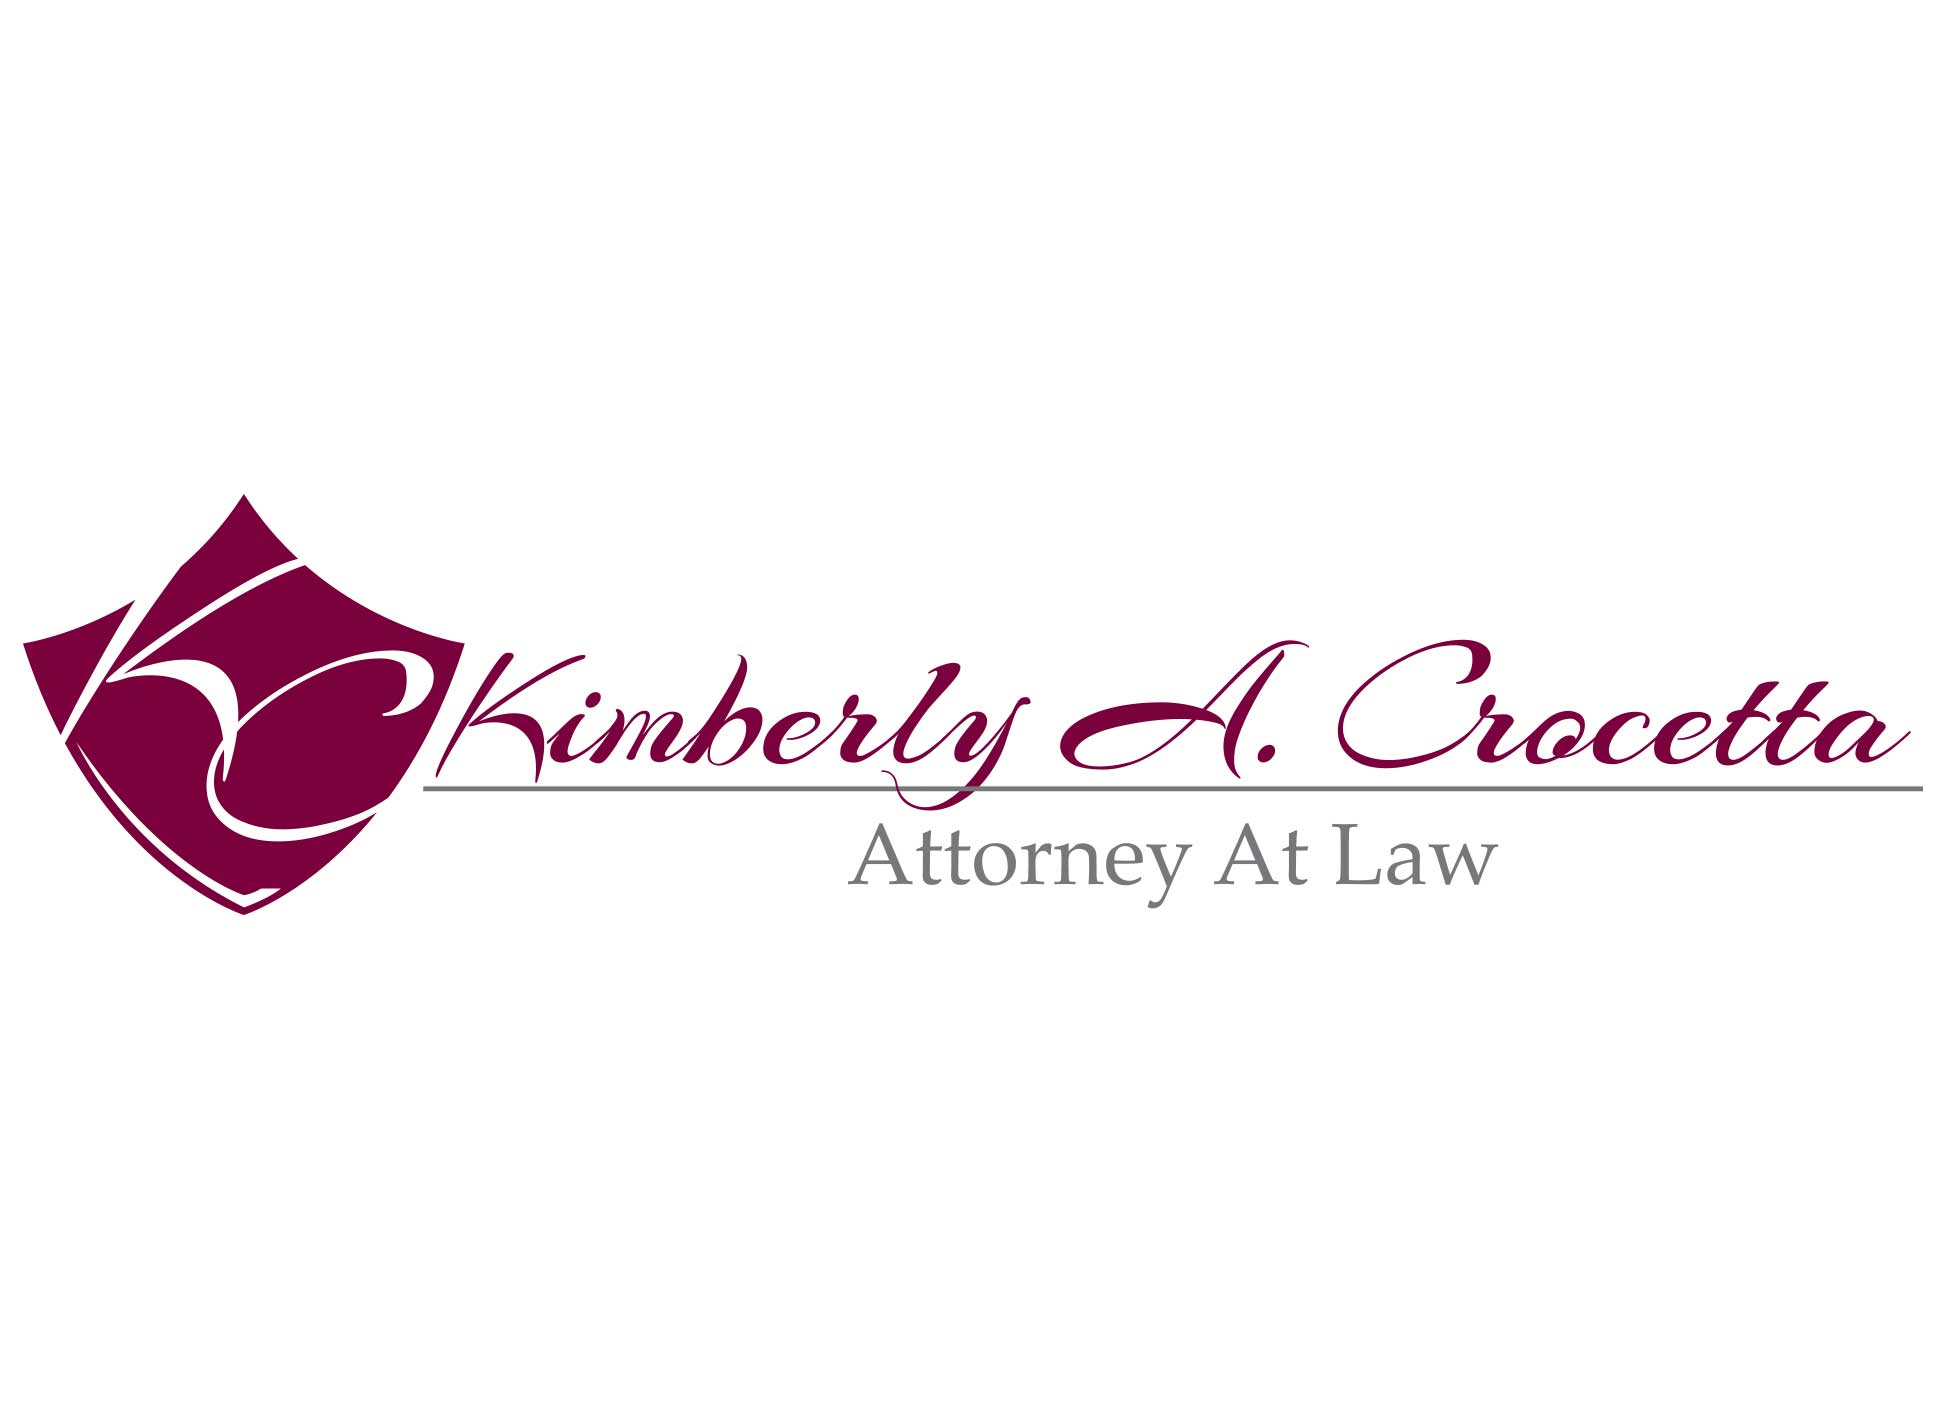 Image of business card front created for Kimberly A. Crocetta Attorney at Law in Saratoga Springs, New York.